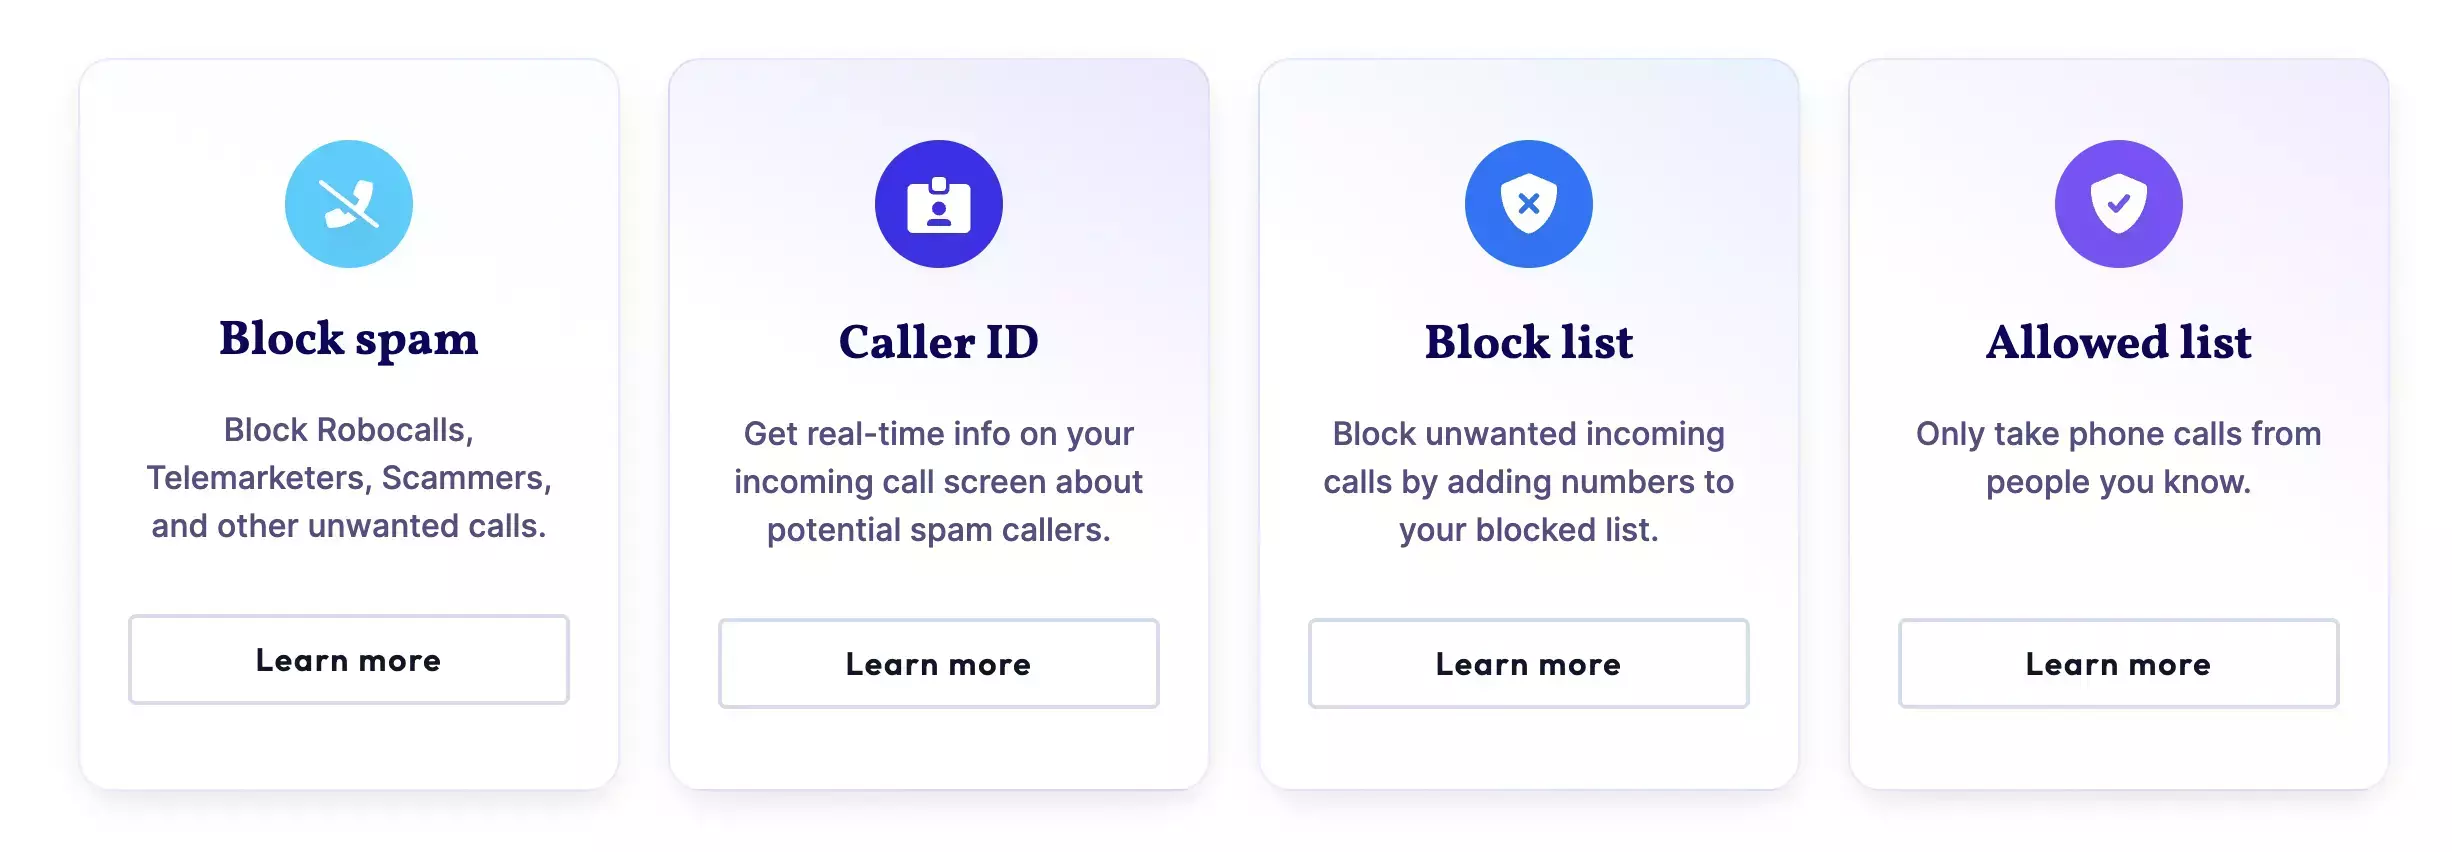 An image of Community Phone's business landline spam call blocker features